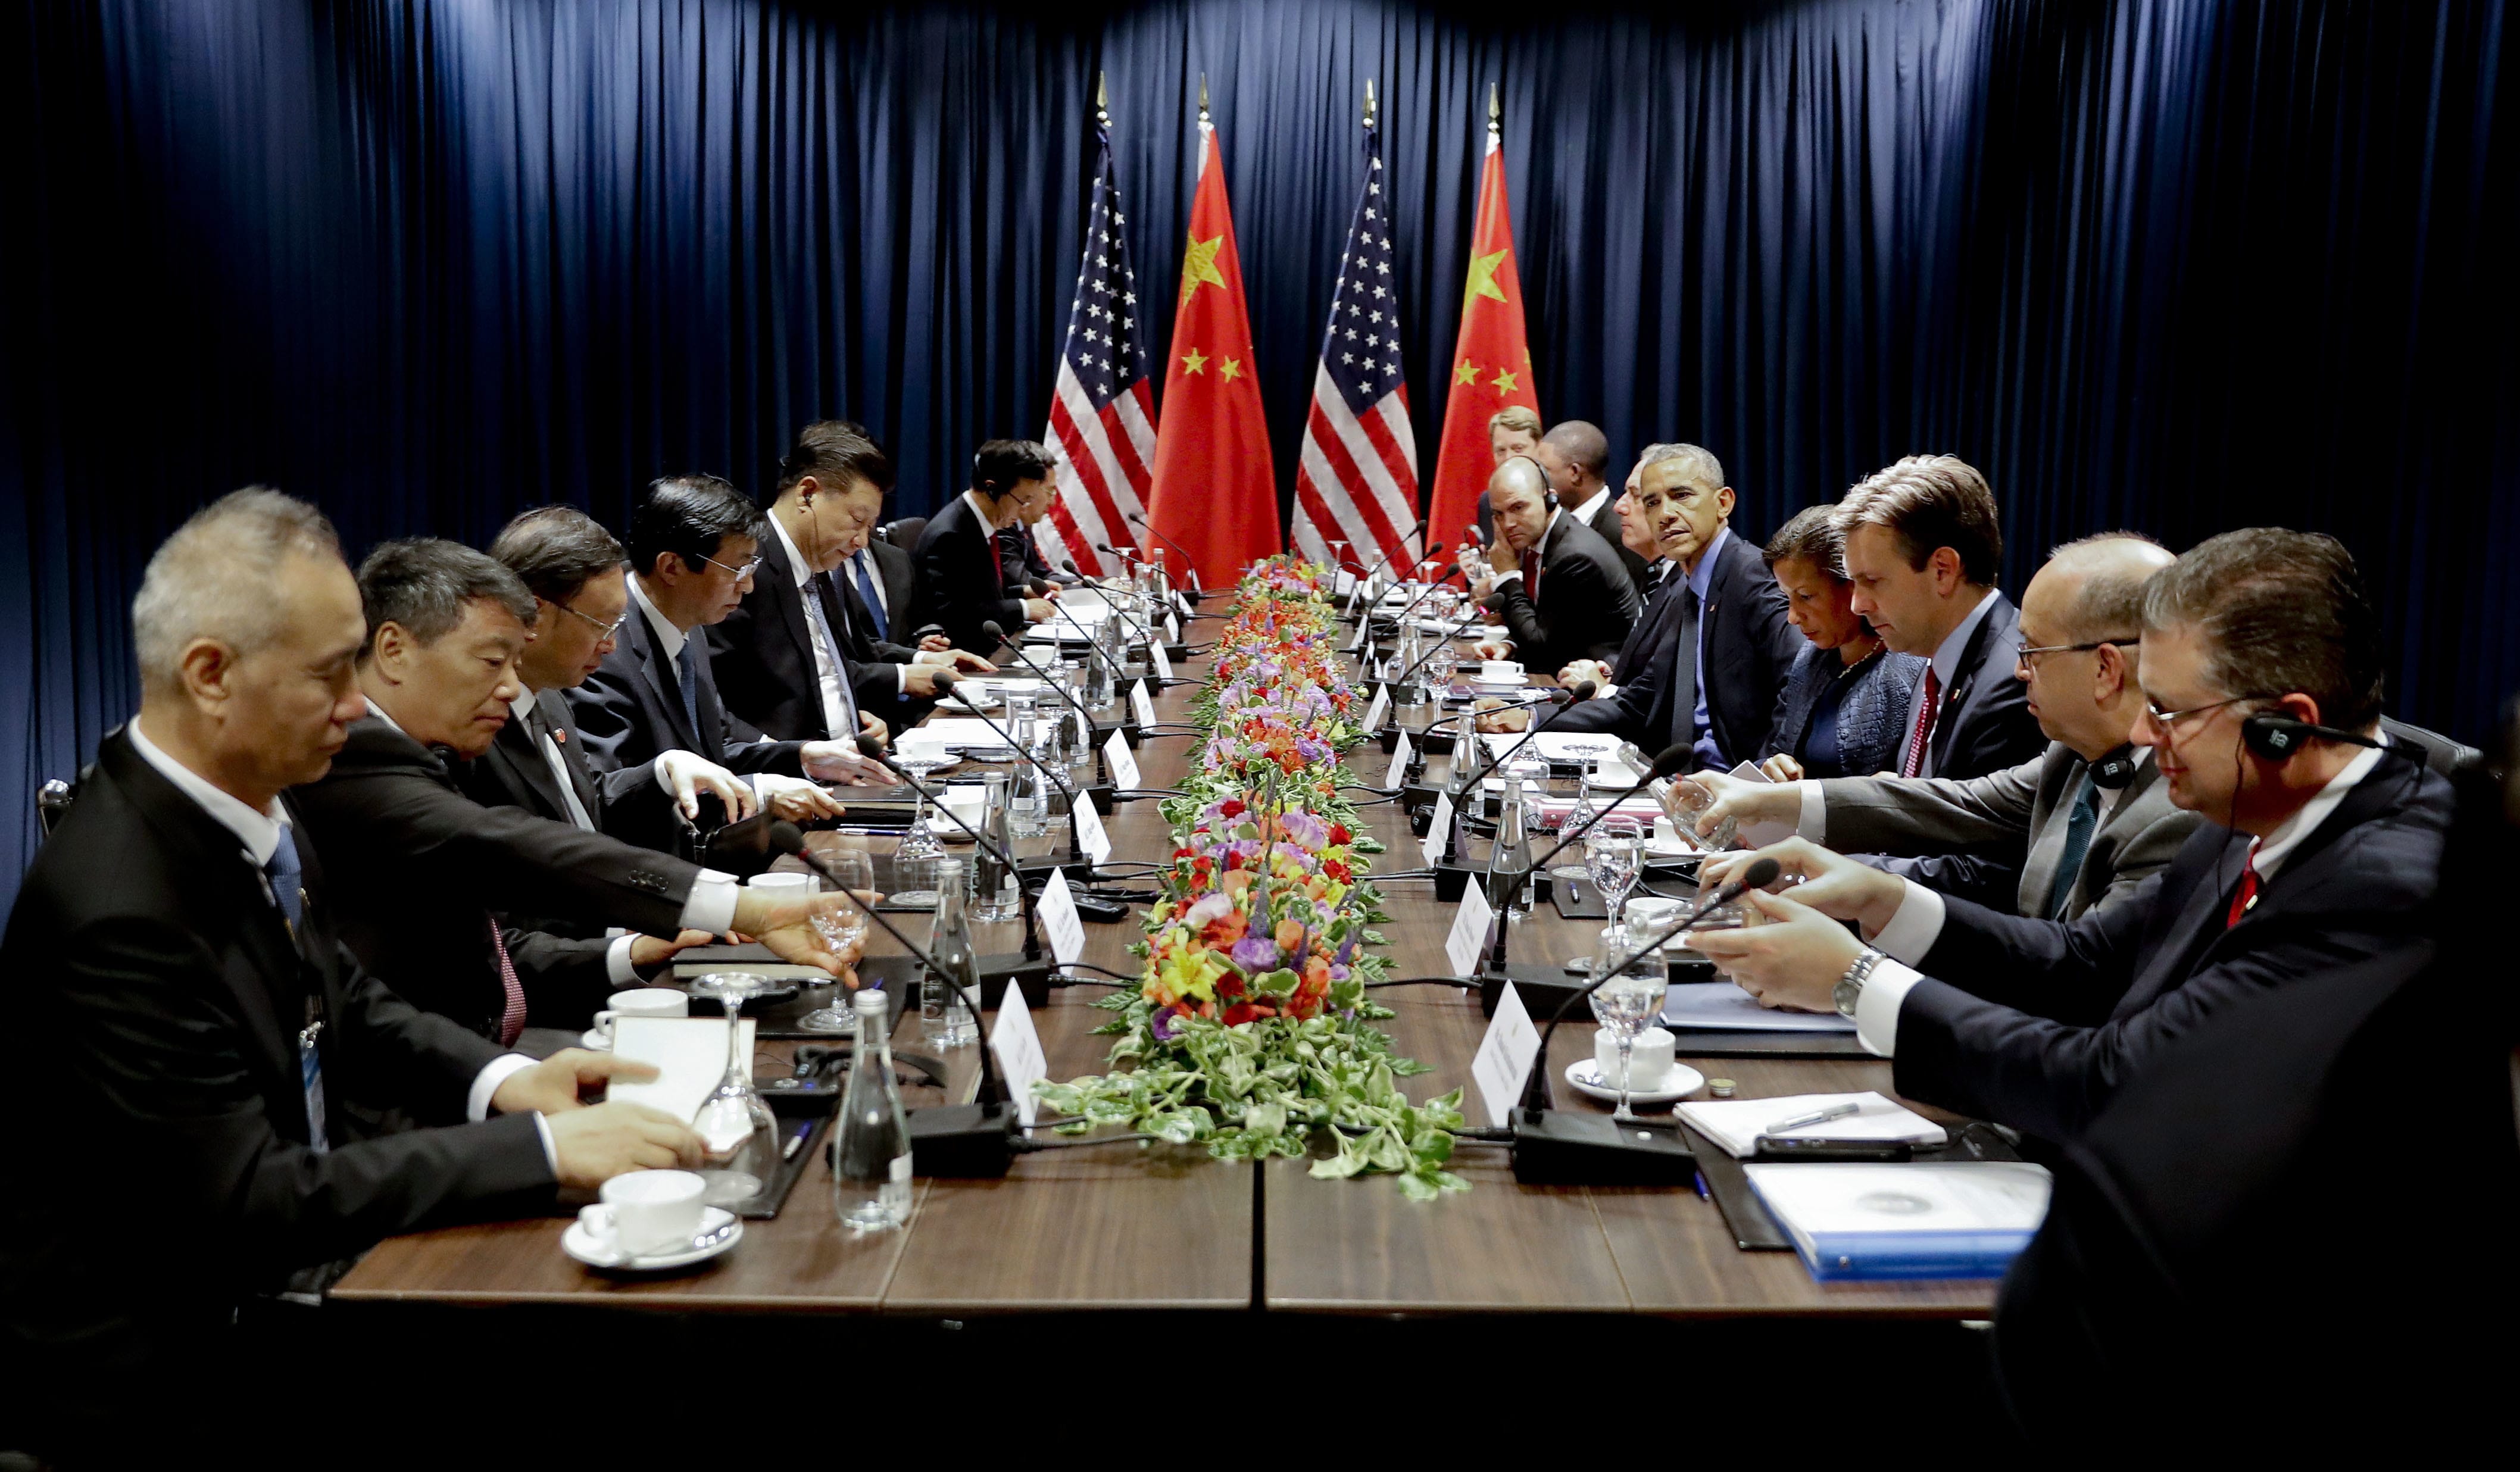 U.S. President Barack Obama, middle right, and China's President Xi Jingping, middle left, sit with members of their delegations for a meeting during the Asia-Pacific Economic Cooperation (APEC) in Lima, Peru, on Saturday, Nov. 19, 2016.